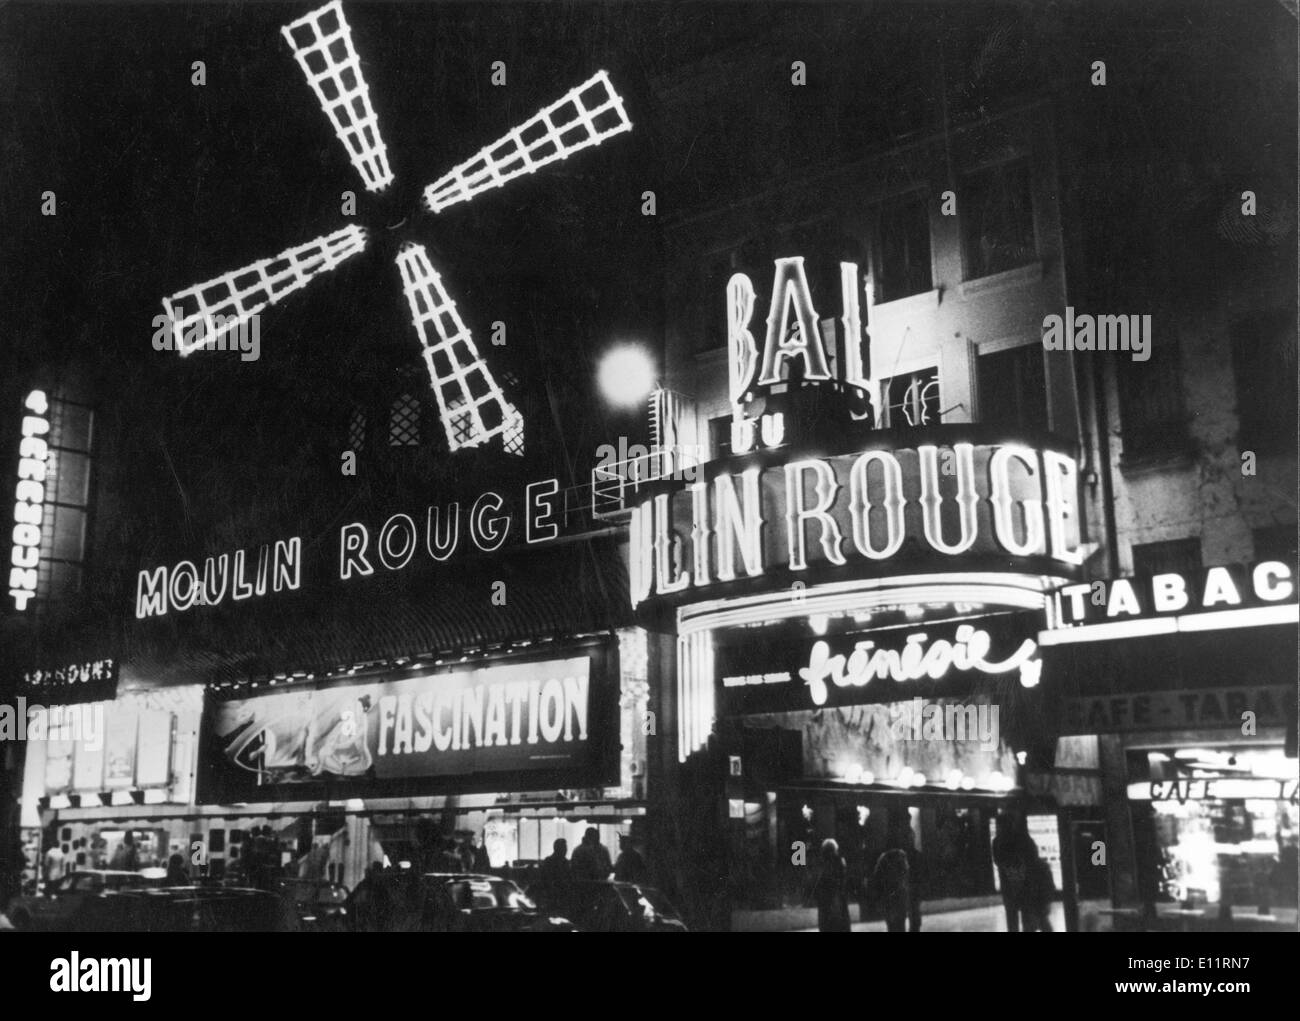 Jan. 1, 1980 - Paris, France - World-famous Moulin Rouge Cabaret, immortalised by Toulouse-Lautrec is located in Montmartre, the only place in Paris where you can see the real Can Can. The Moulin Rouge is a tourist destination, offering musical dance entertainment for adult visitors from around the world. Much of the romance from turn-of-the-century France is still present in the club's decor. Many international stars have performed on stage at the Moulin Rouge: Ella Fitzgerald, Liza Minelli, Frank Sinatra, Elton John Stock Photo